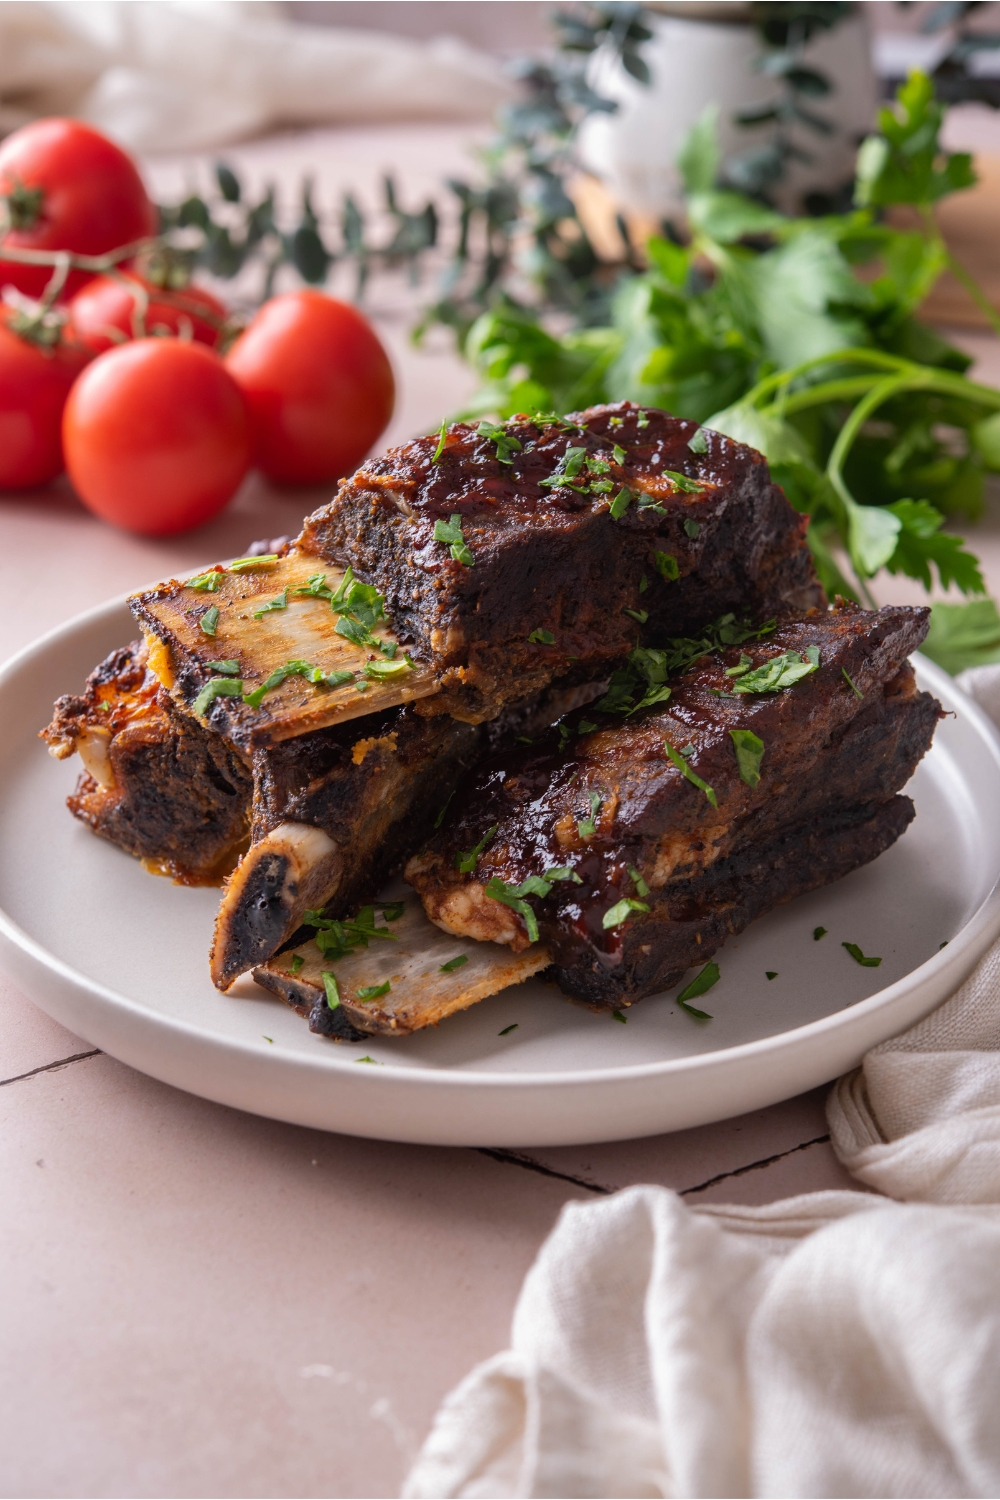 A stack of barbecue beef ribs on a white plate garnished with fresh herbs. In the background are vine tomatoes and green herbs.